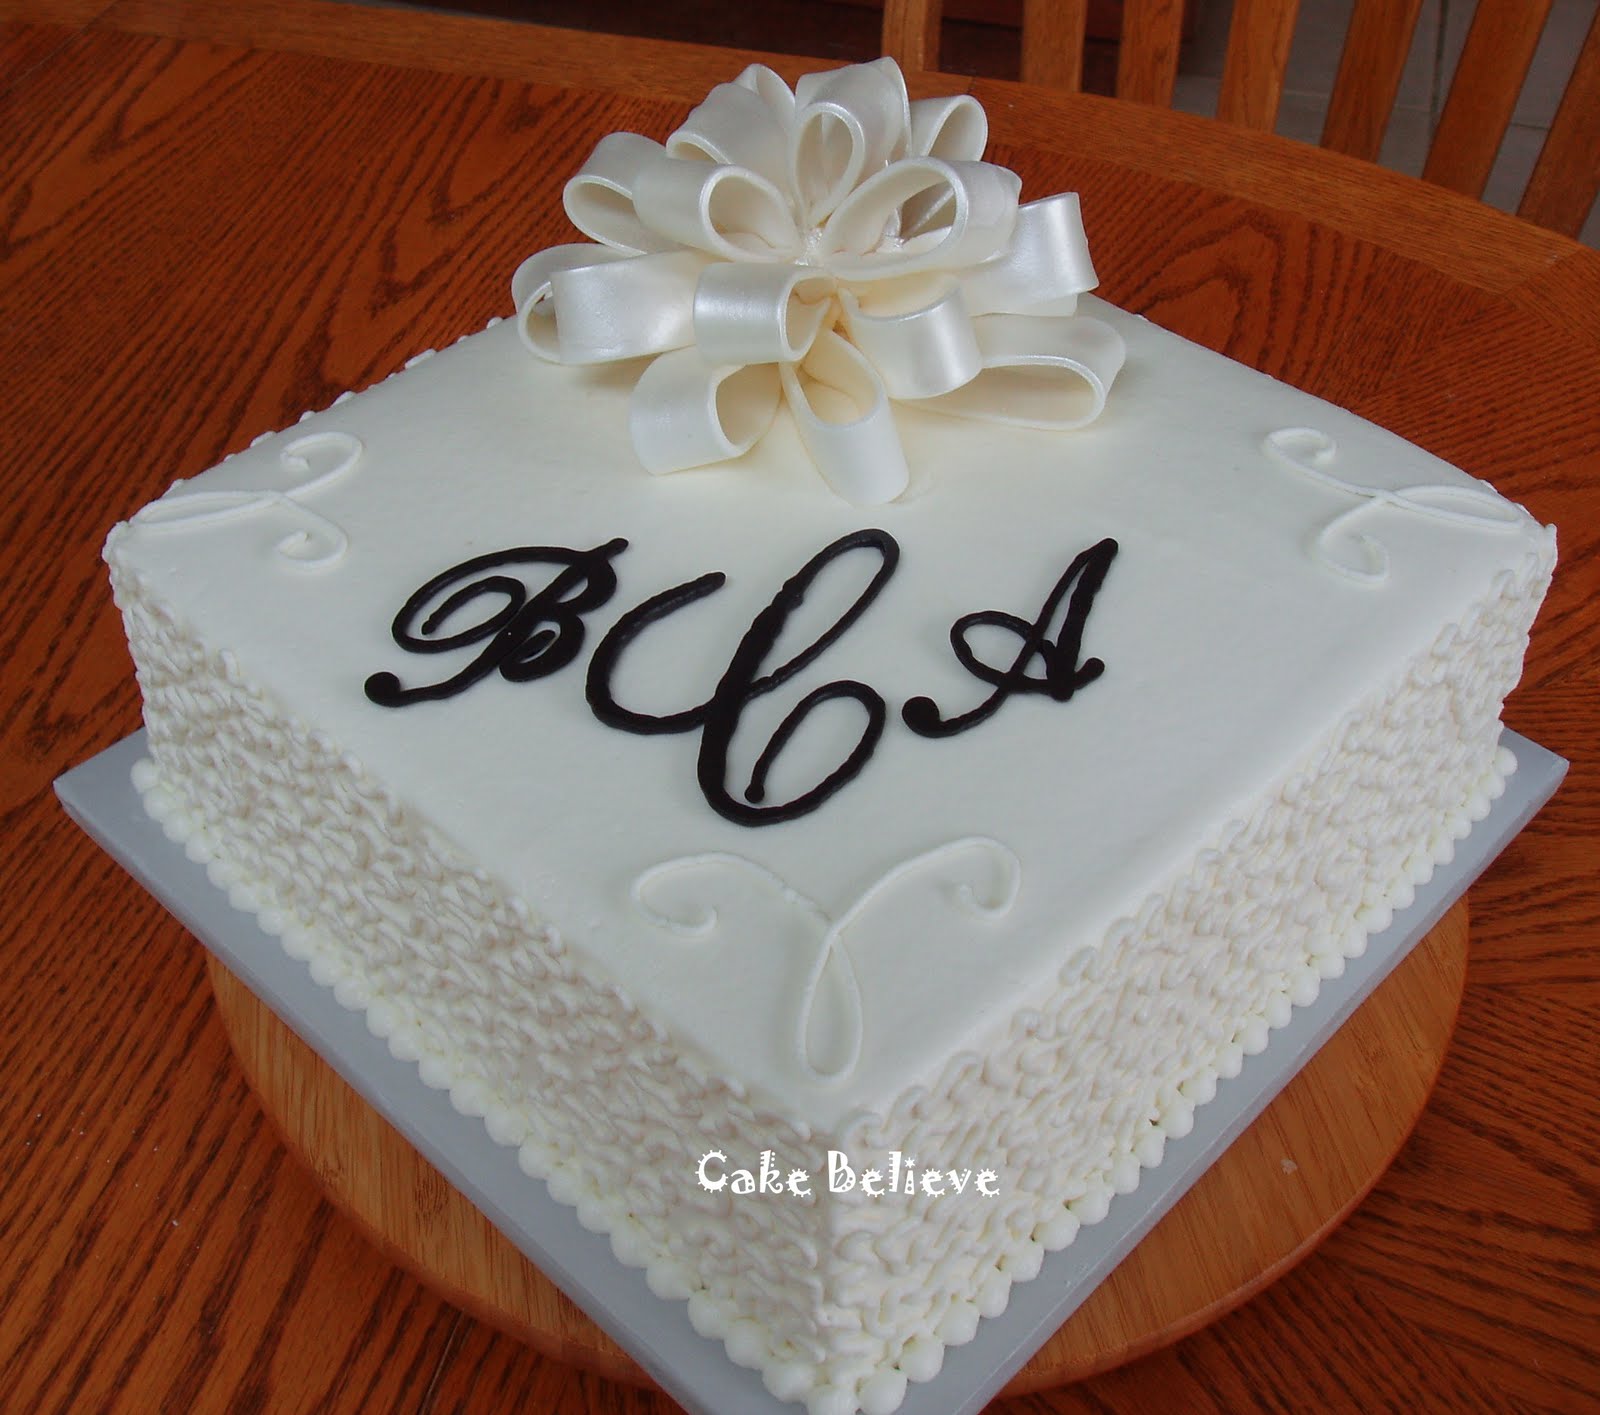 And a simple white buttercream